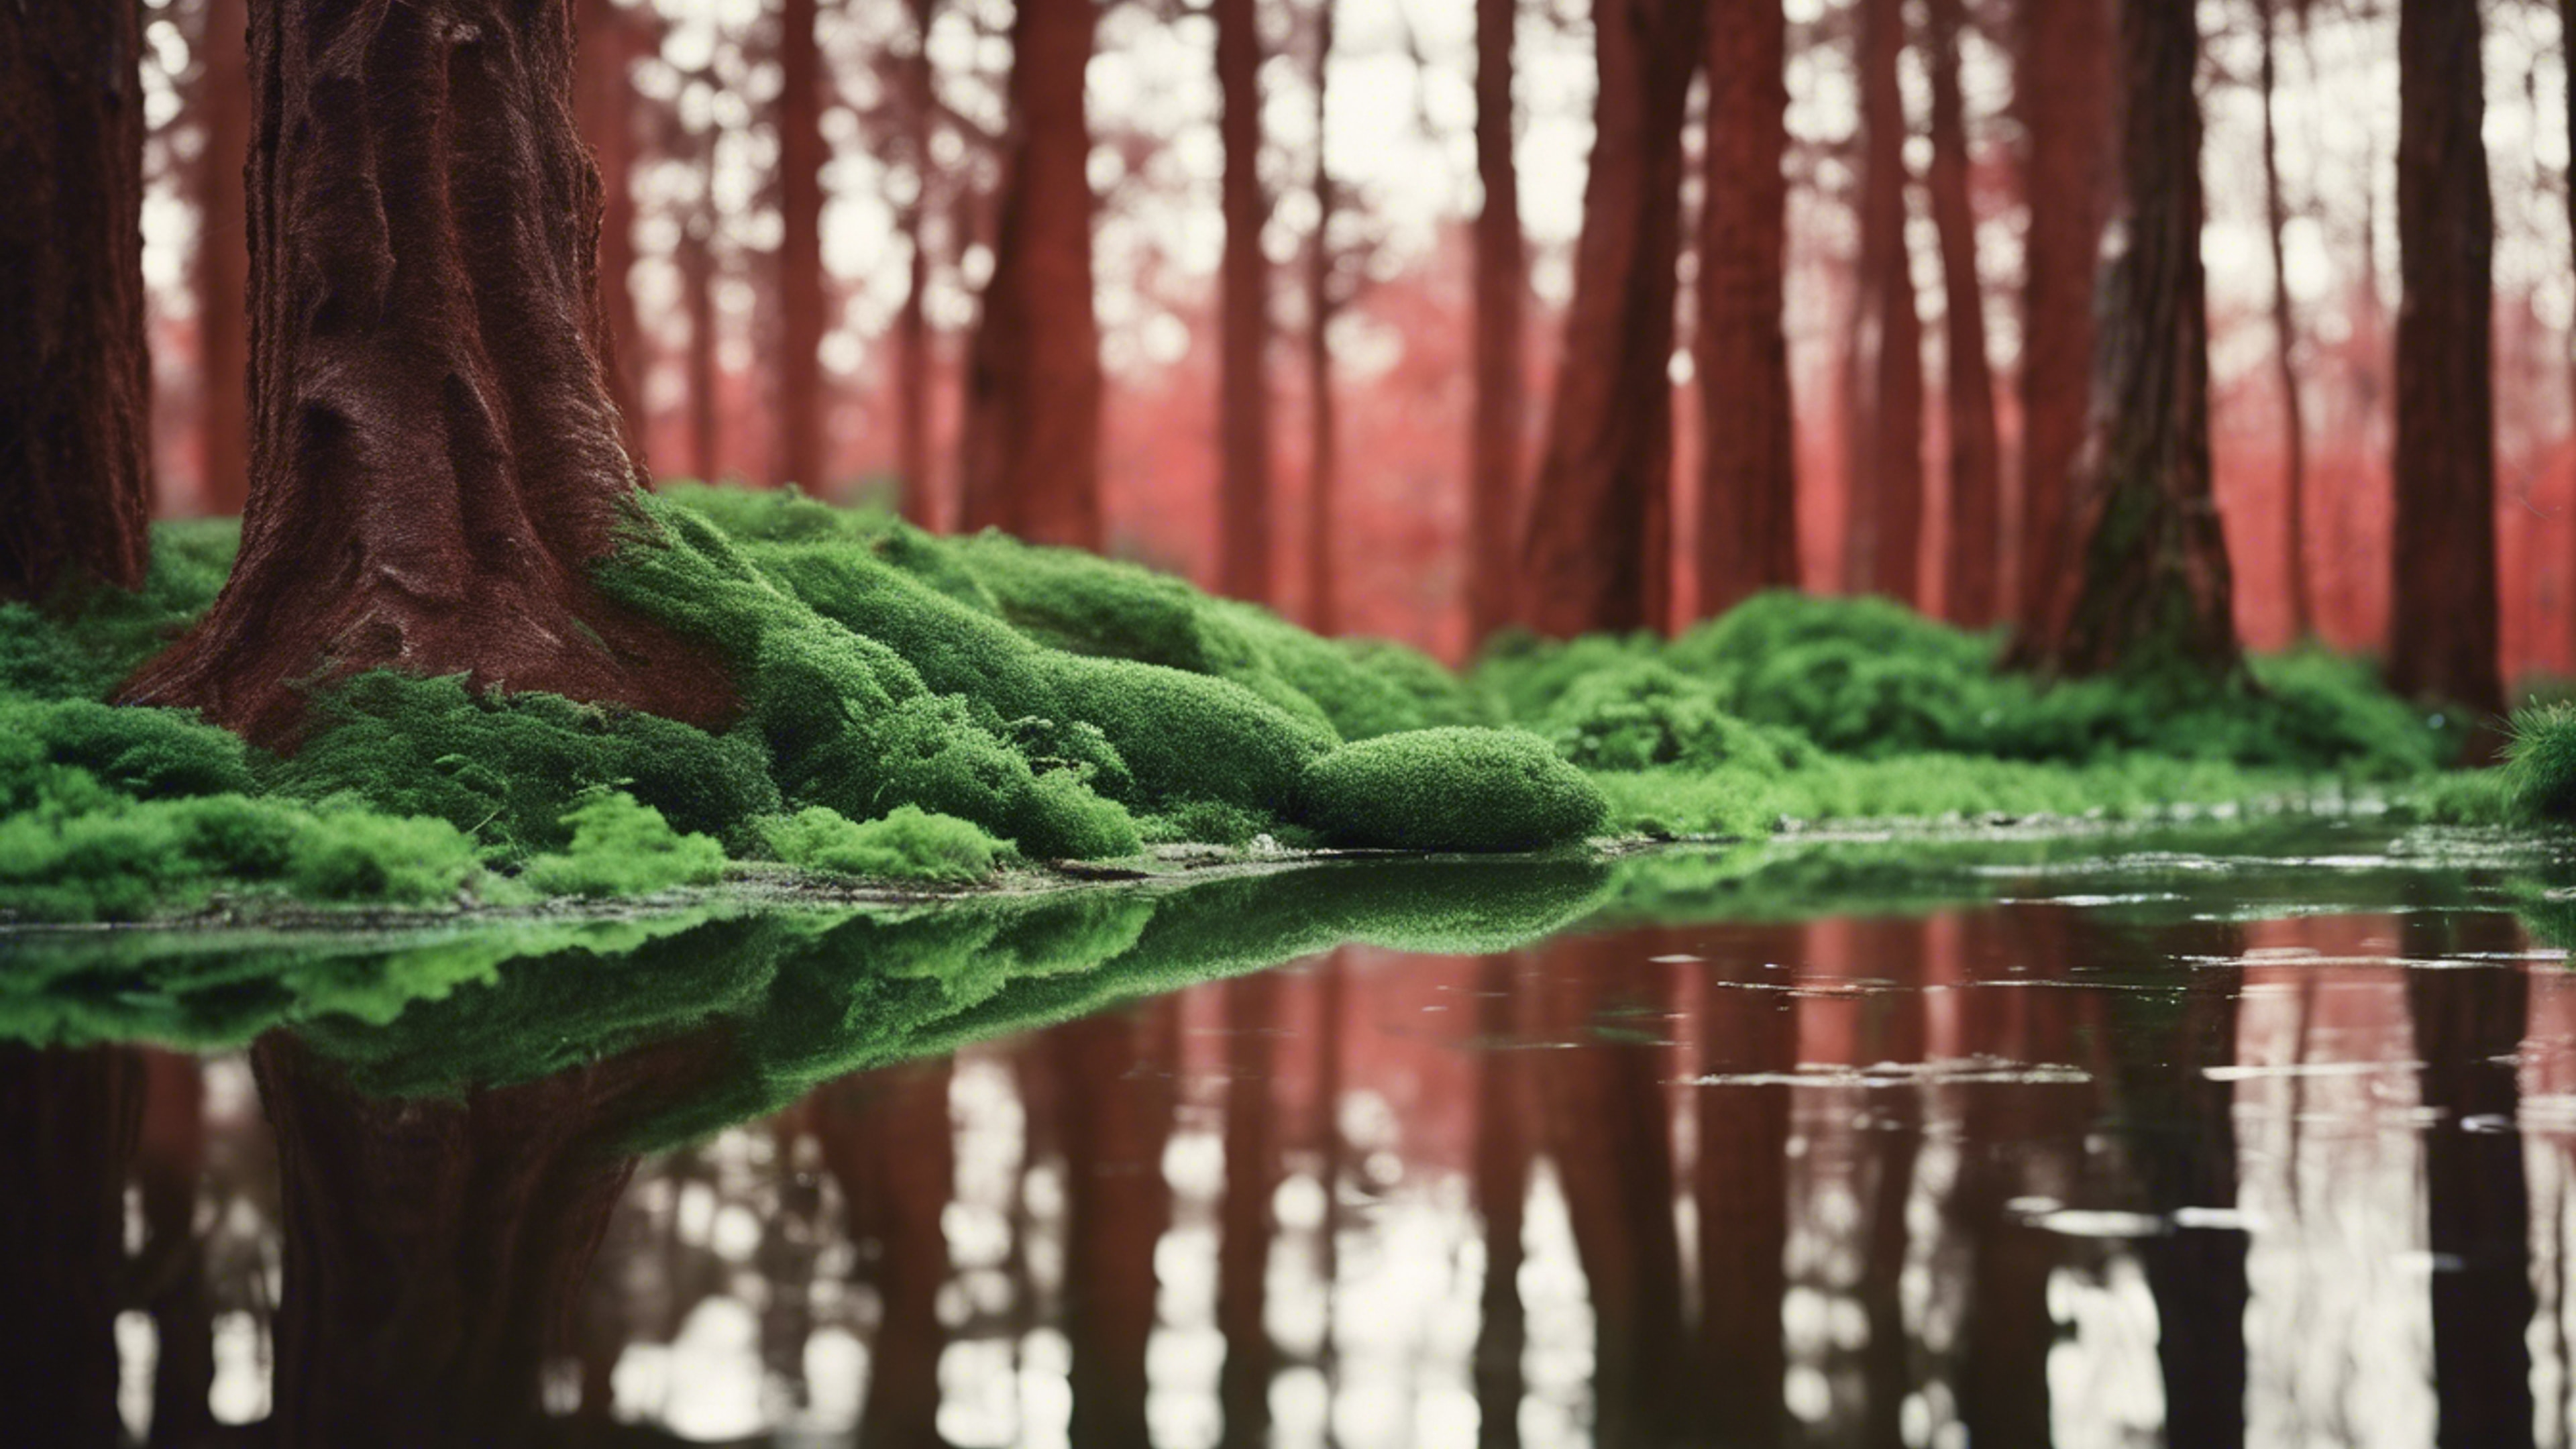 Lush, green forest reflections on a shiny, red leather surface. Tapet[6f4e1618f75b40719461]